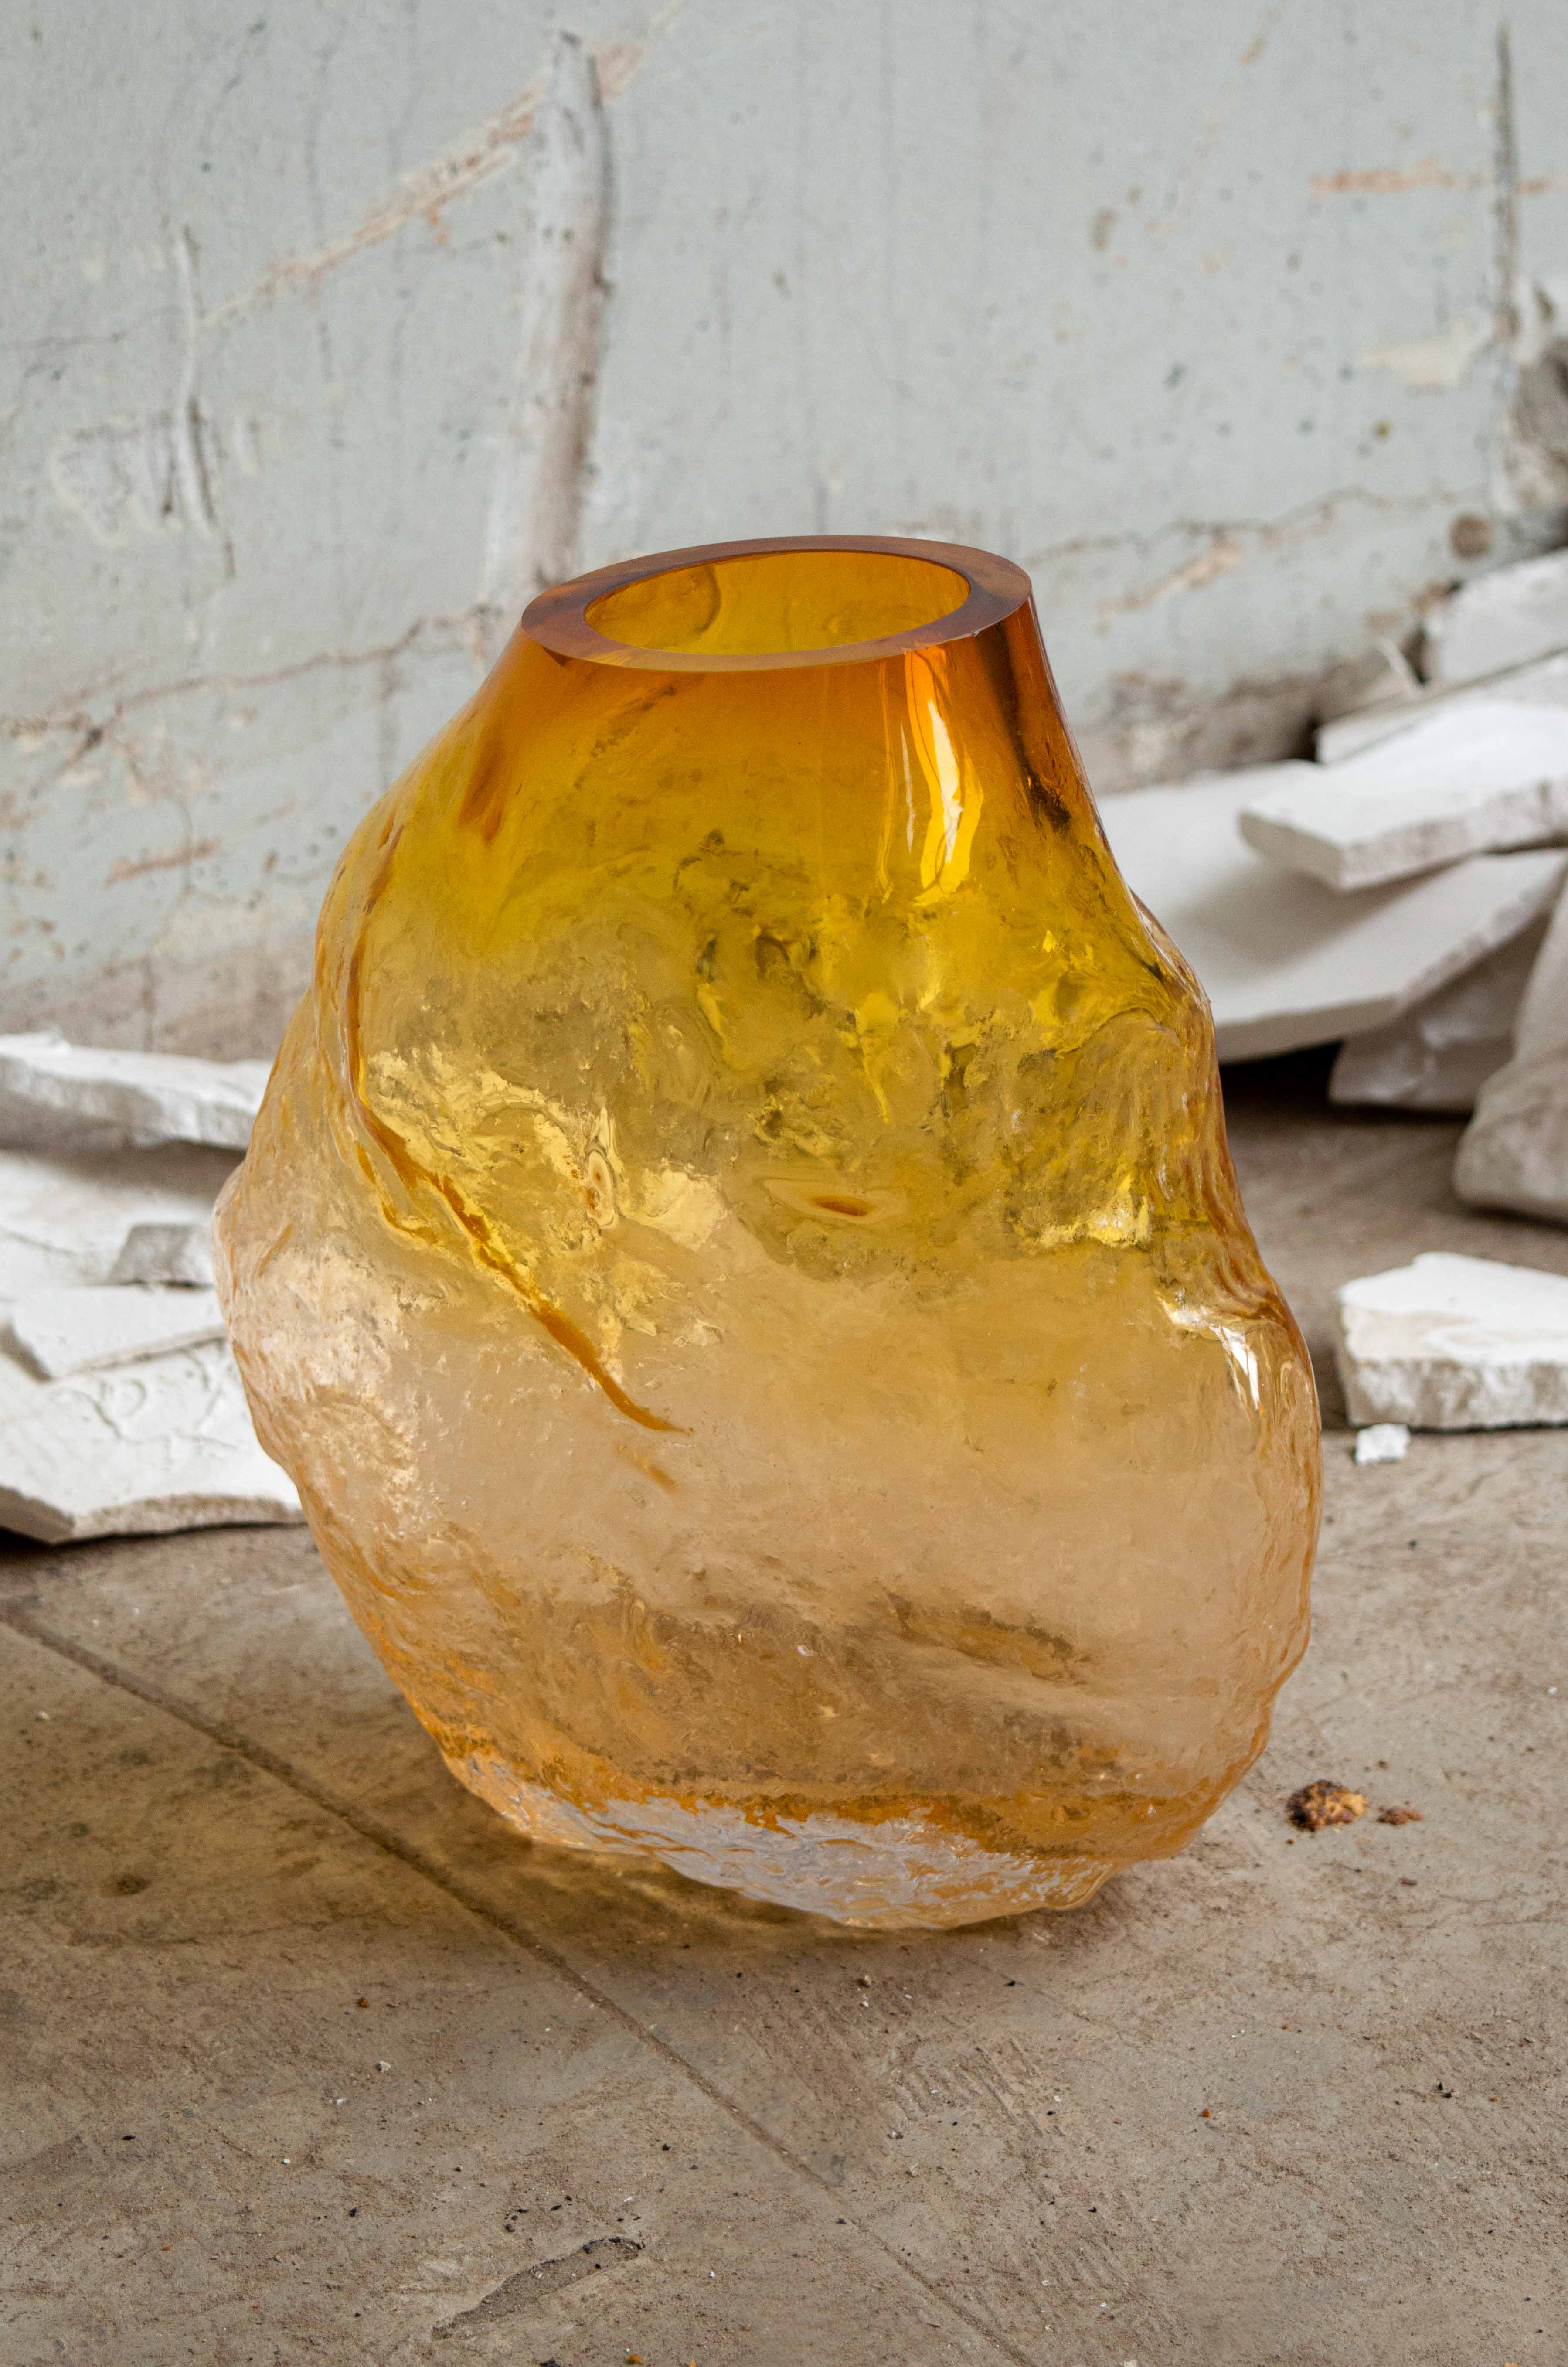 bruno-baietto-sculpts-glass-objects-by-blowing-glass-inside-bread